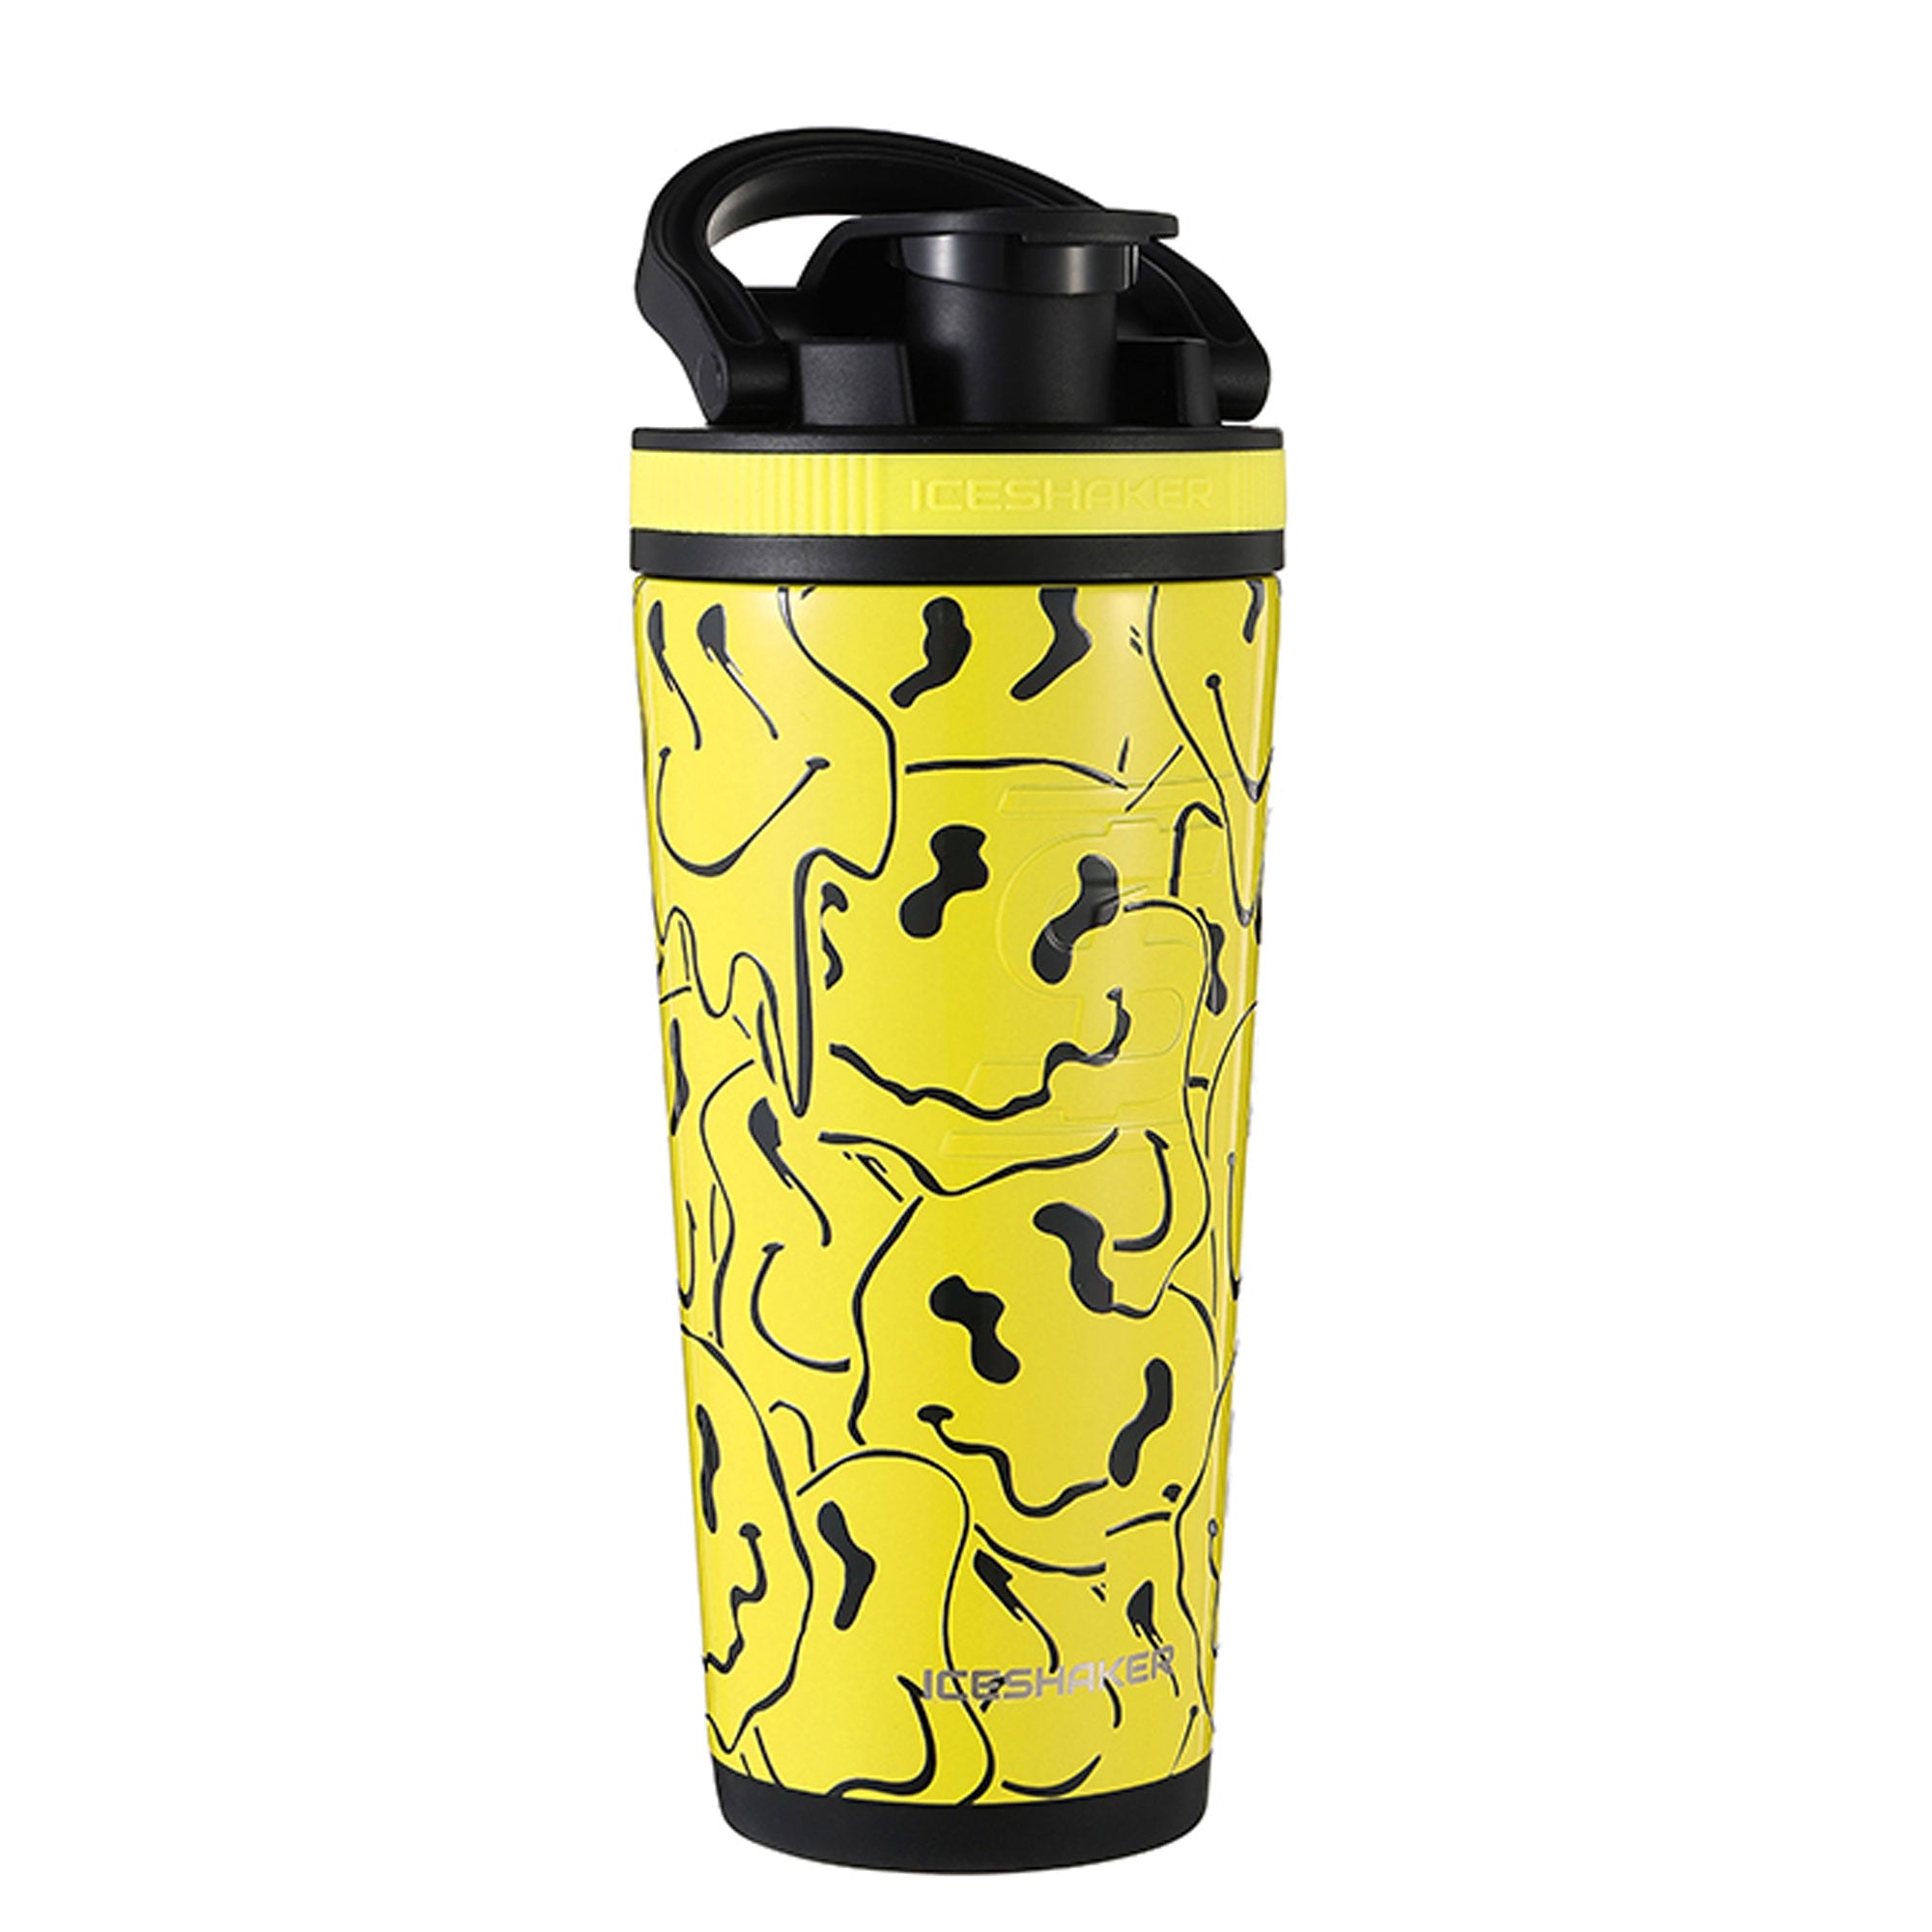 Ozizo M-63 Cyan 20oz 590 ml Insulated Protein Shaker with Small Mouth and  Spring